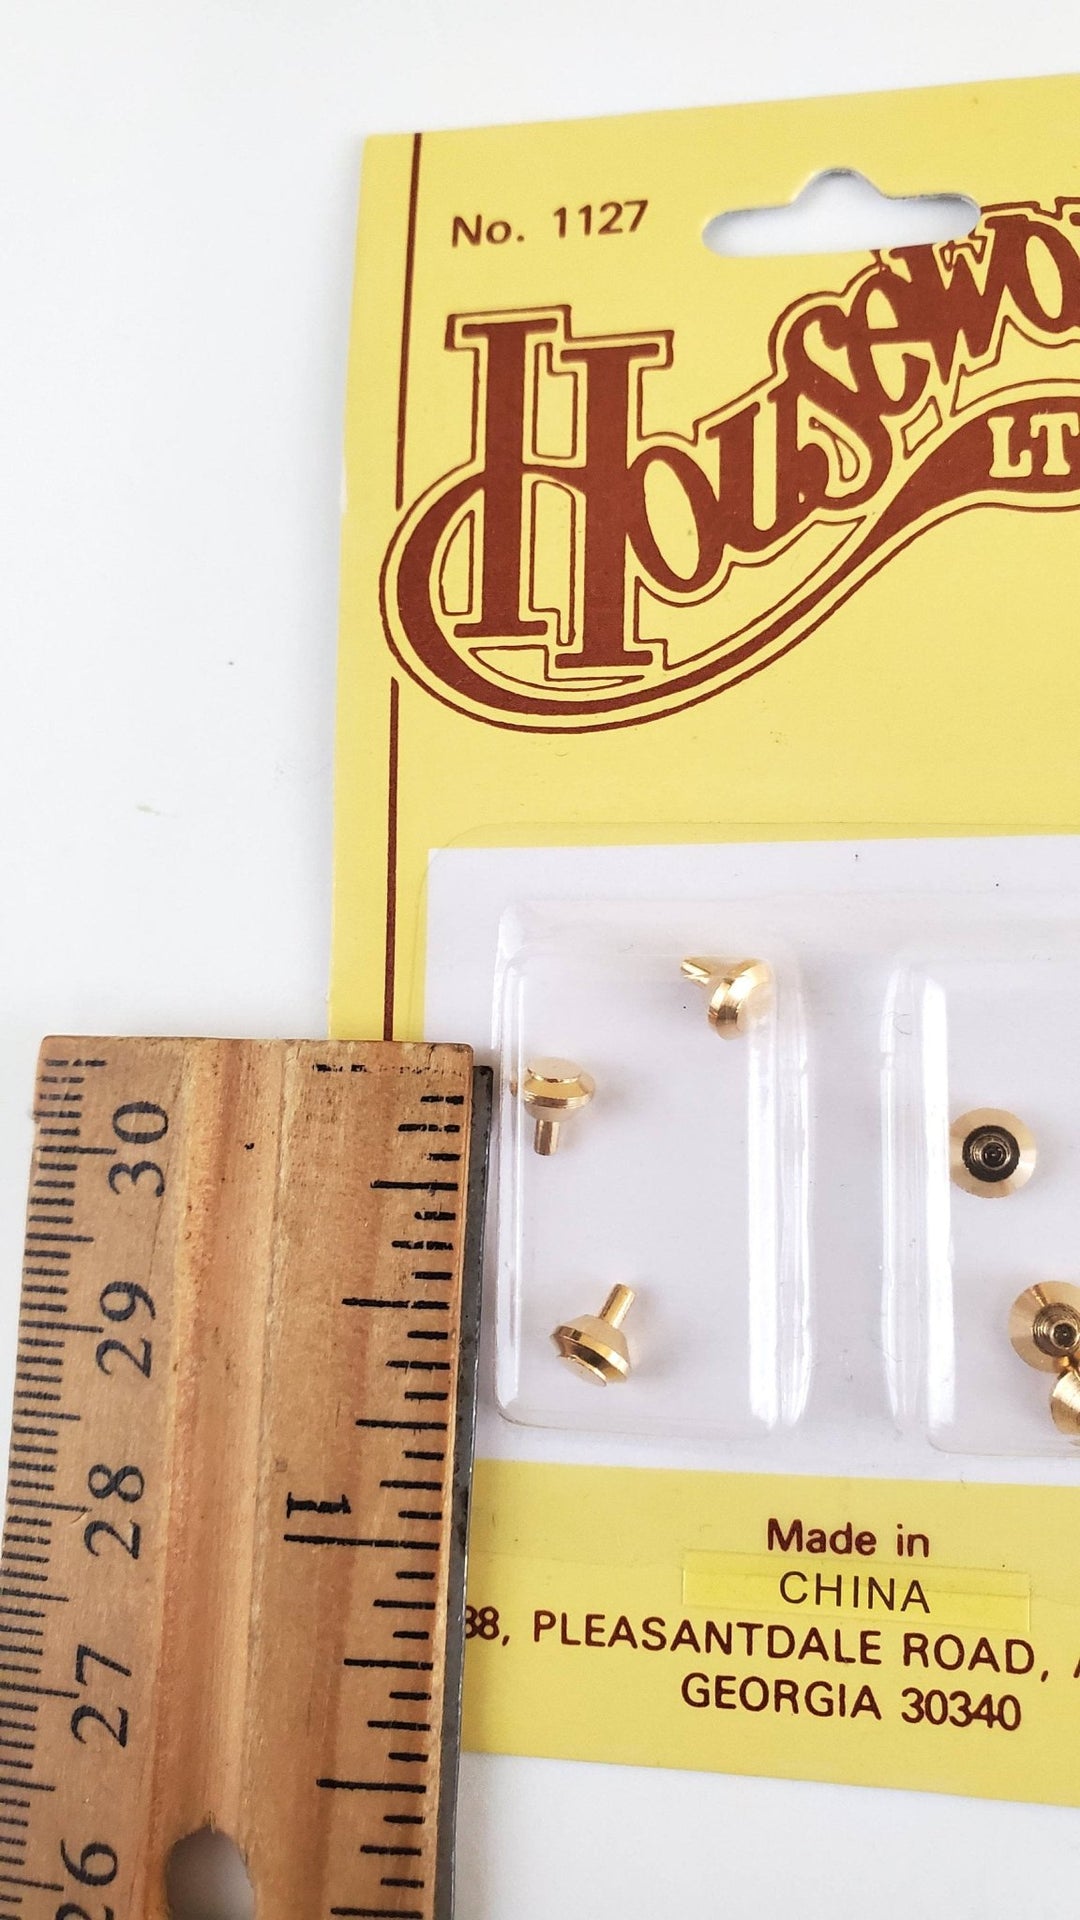 Dollhouse Miniature Tiny Gold Brass Knobs for Door or Drawer Pulls Set of 6 1:12 Scale Houseworks #1127 - Miniature Crush